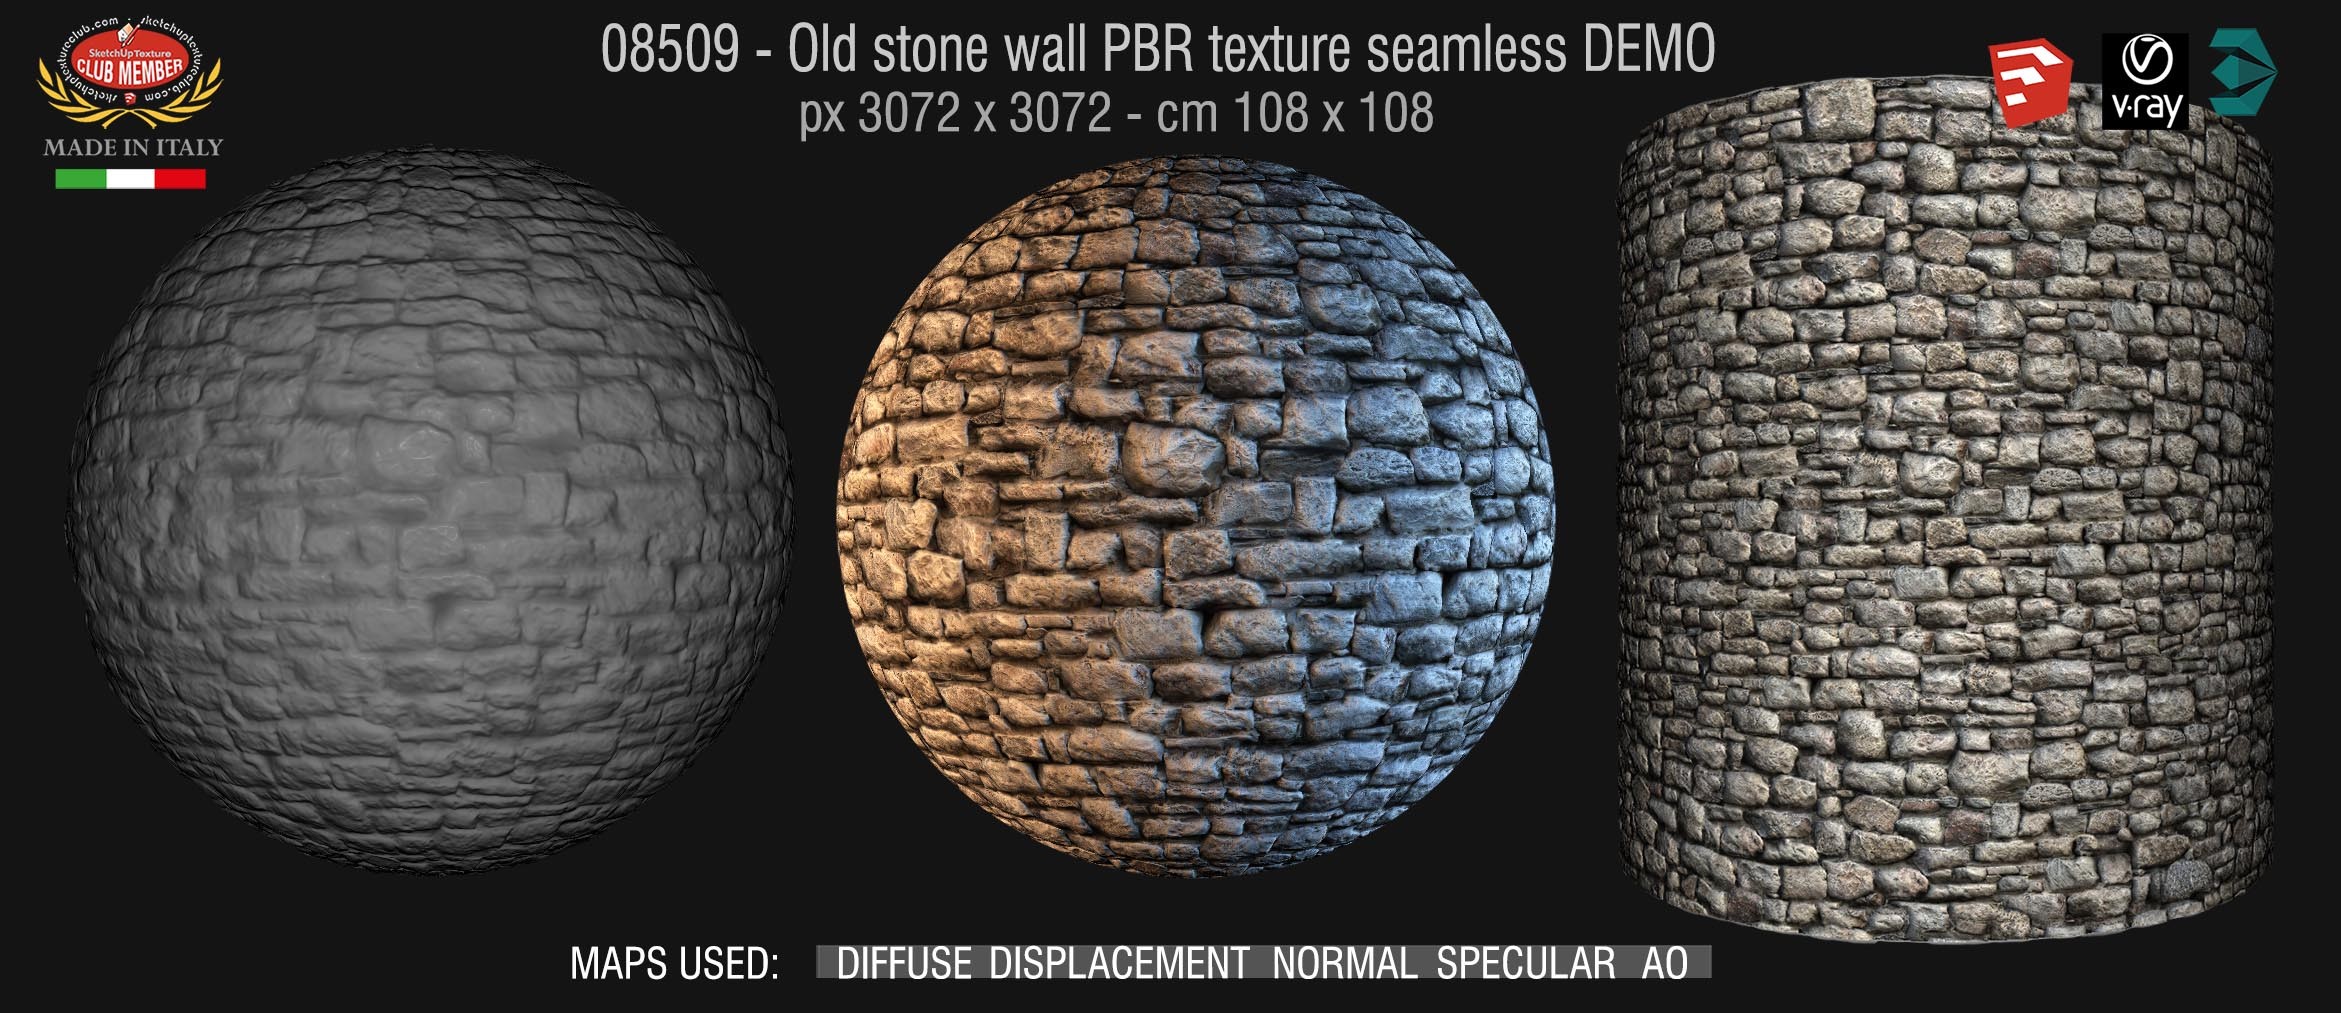 08509 Old stone wall PBR texture seamless DEMO